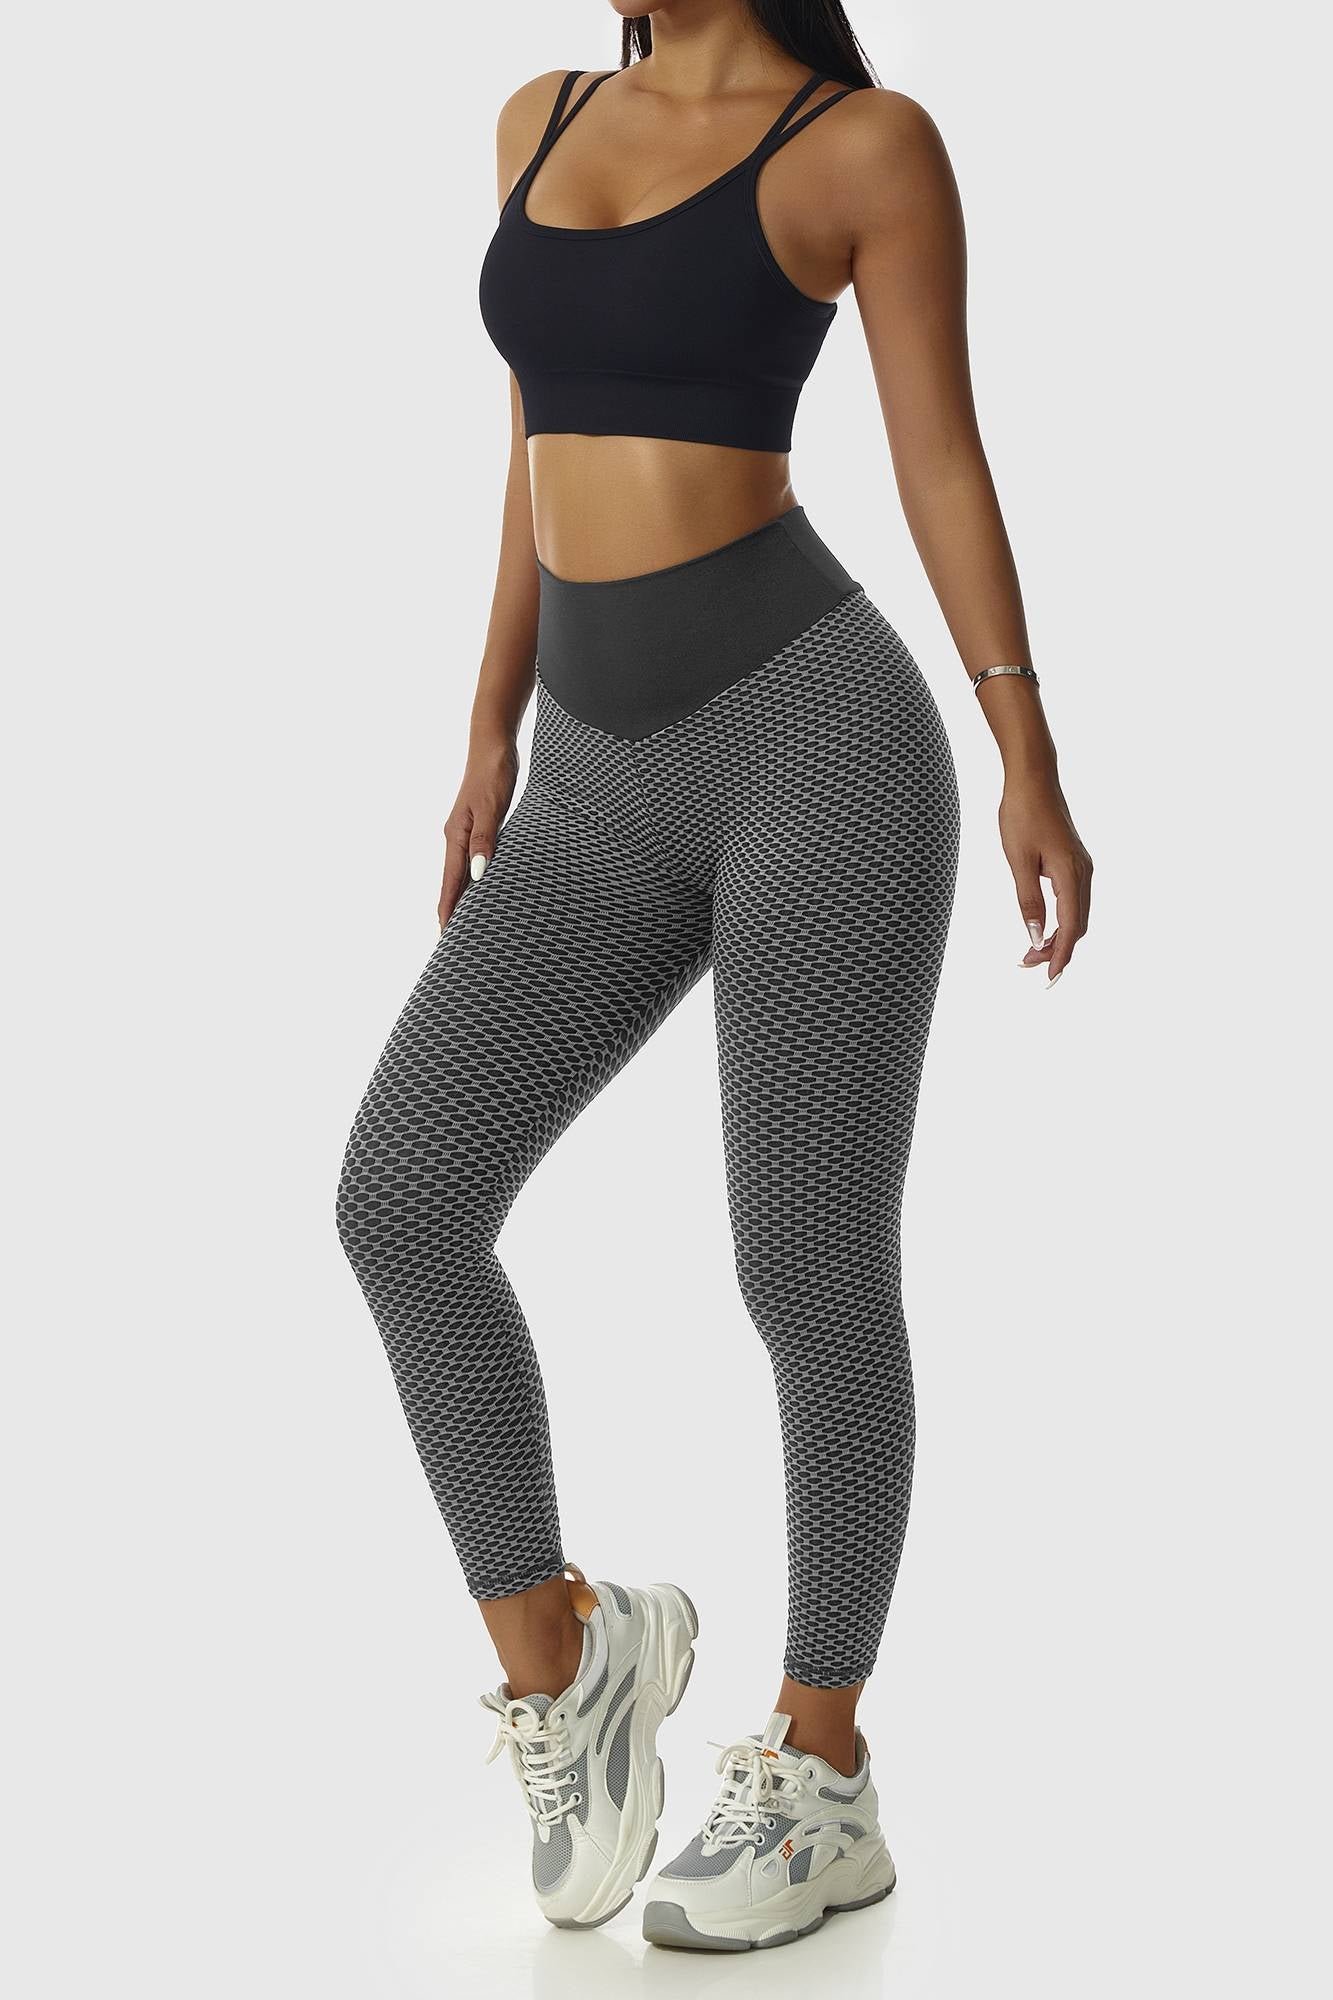 Snatched By Temz High Waisted Leggings Scrunchies Butt Lifting